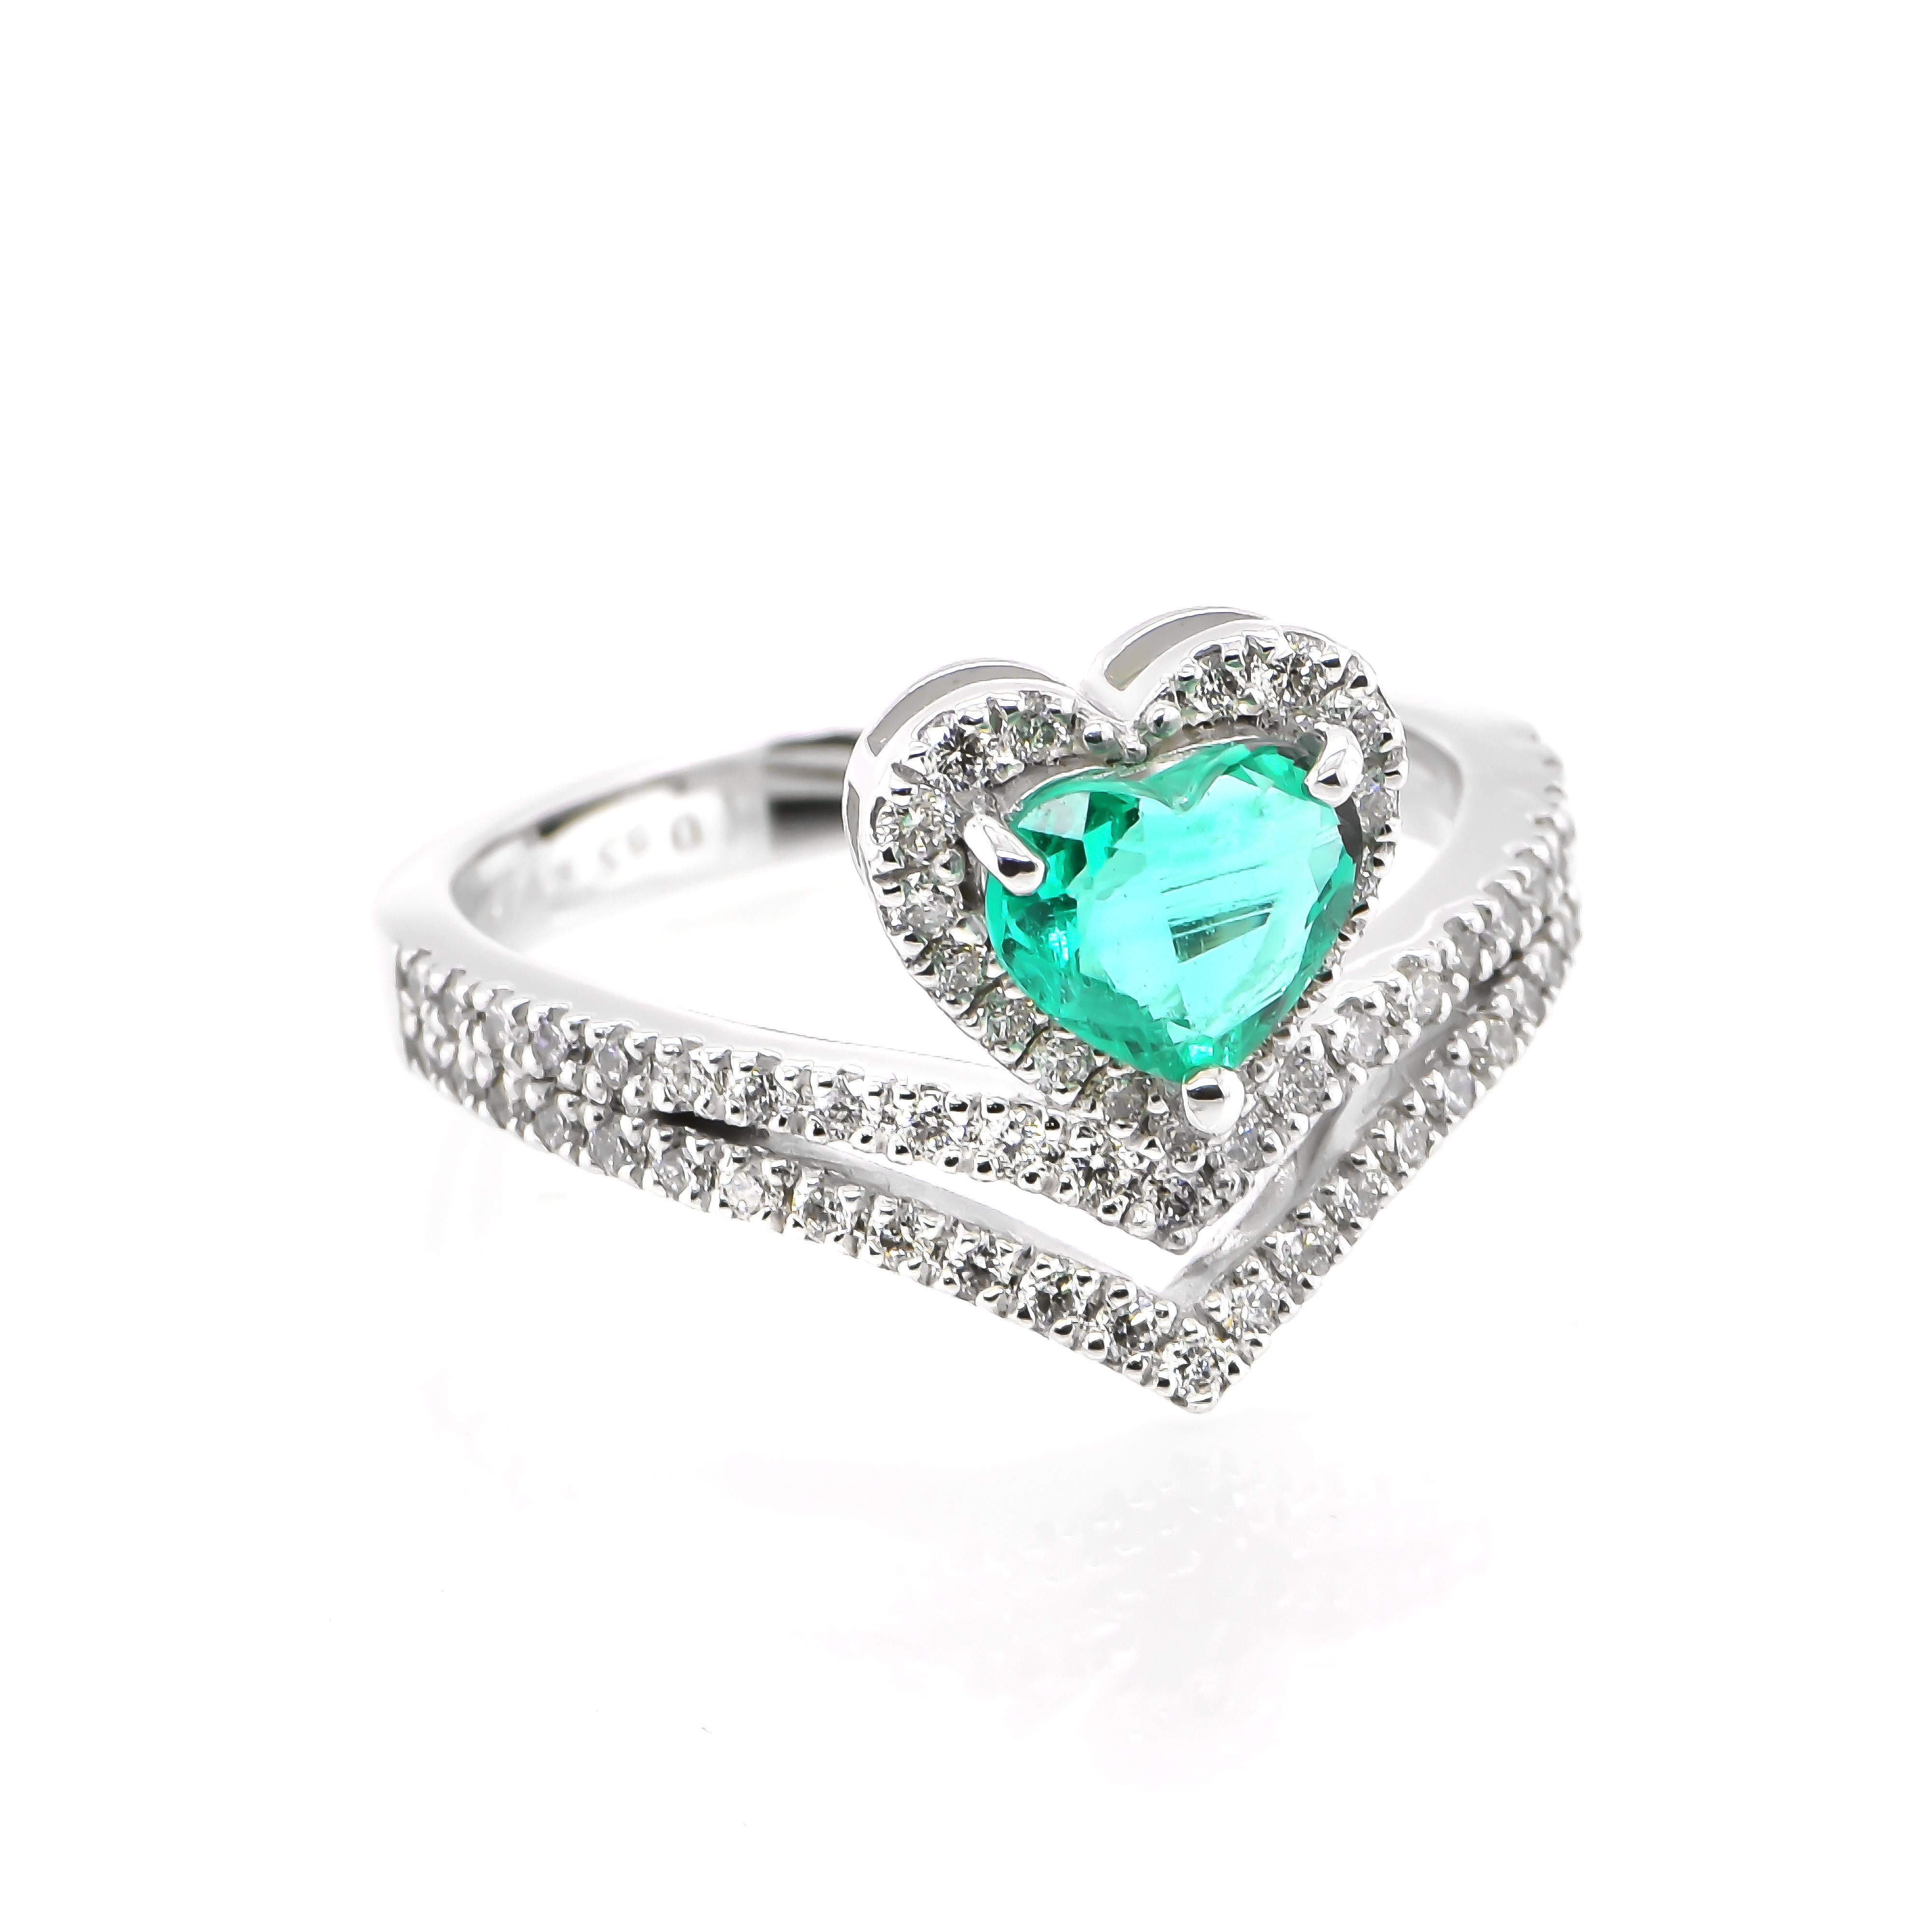 A stunning ring featuring a 0.65 Carat Natural Emerald and 0.42 Carats of Diamond Accents set in Platinum. People have admired emerald’s green for thousands of years. Emeralds have always been associated with the lushest landscapes and the richest